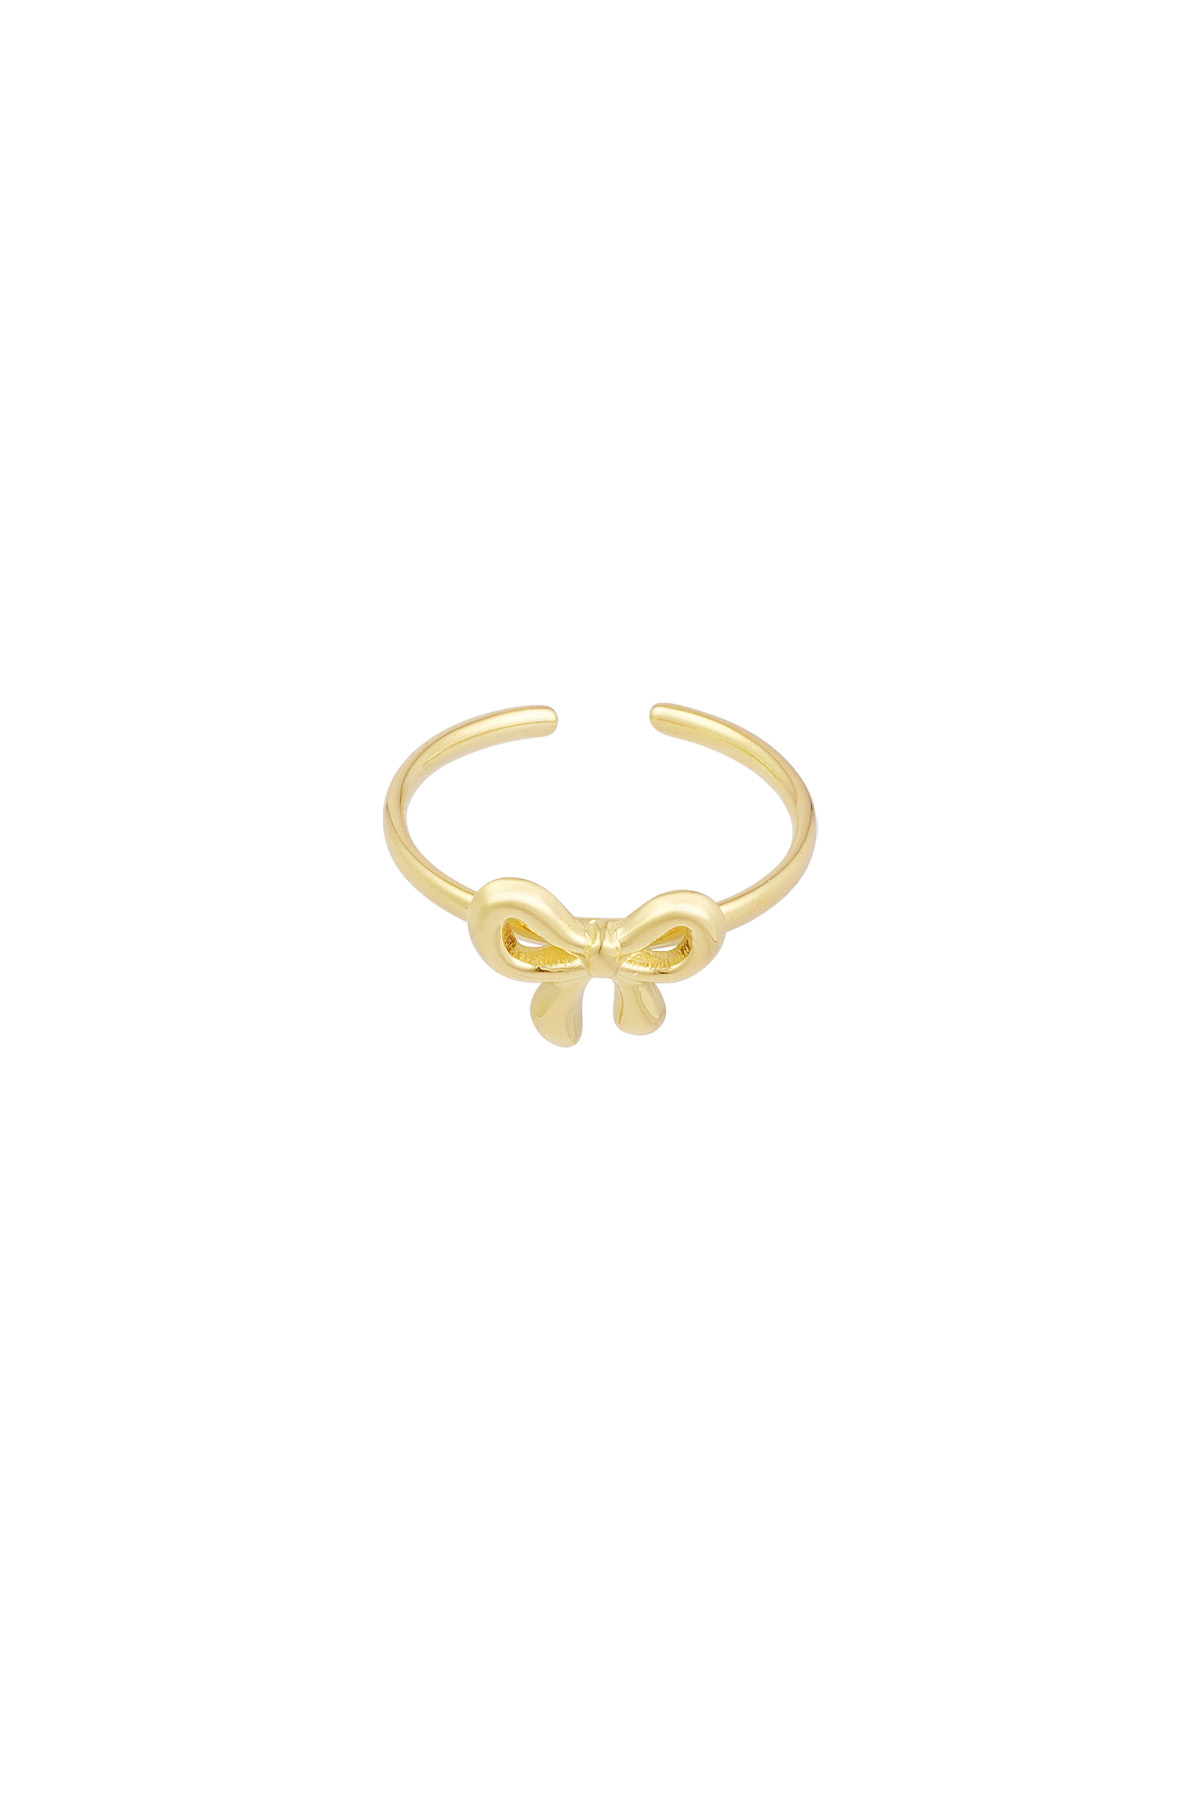 Ring bow life - goud 